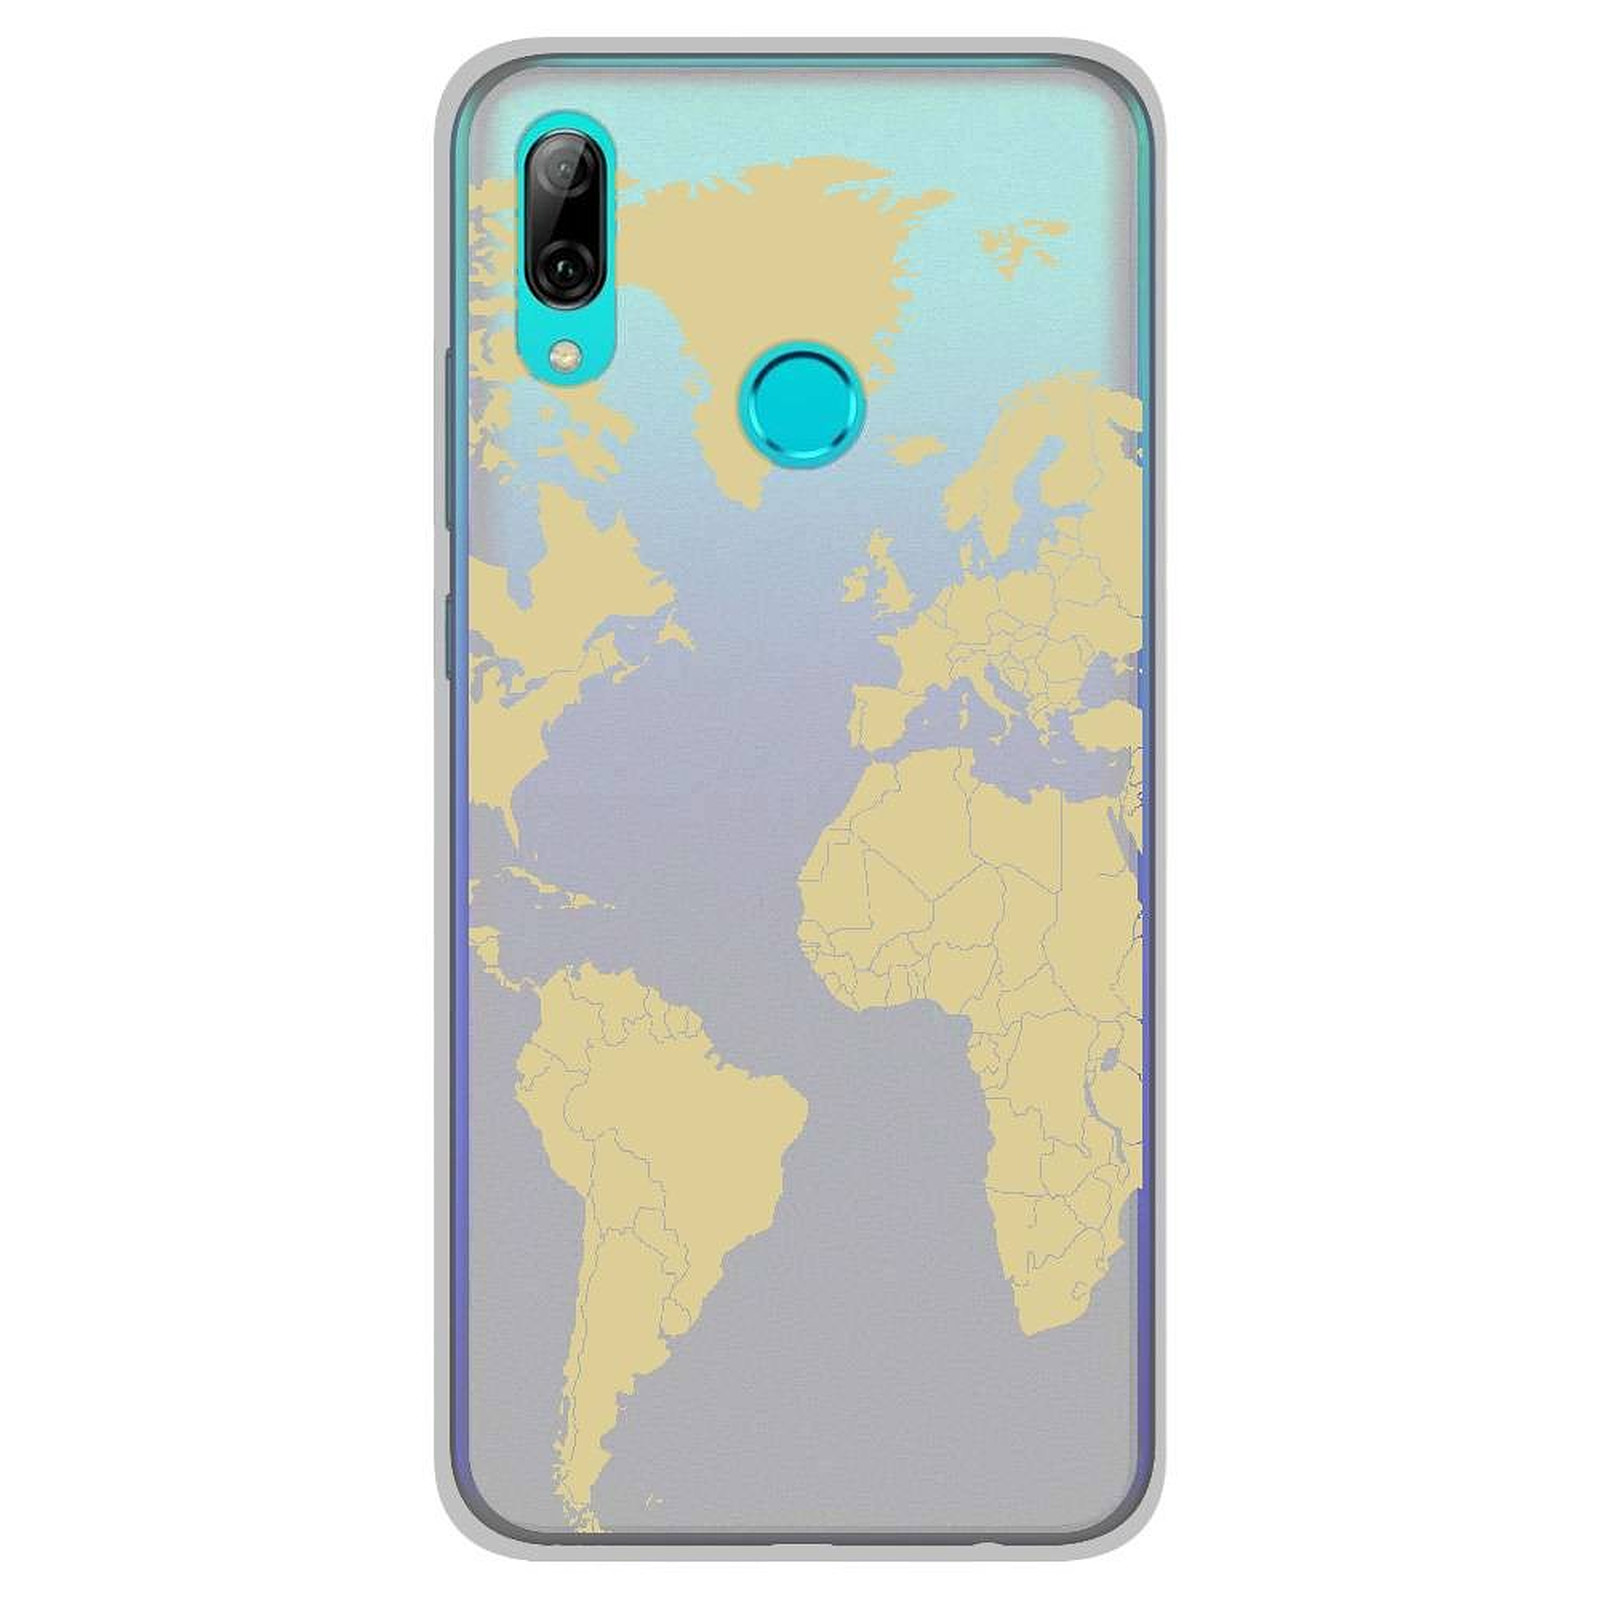 1001 Coques Coque silicone gel Huawei P Smart 2019 motif Map beige - Coque telephone 1001Coques